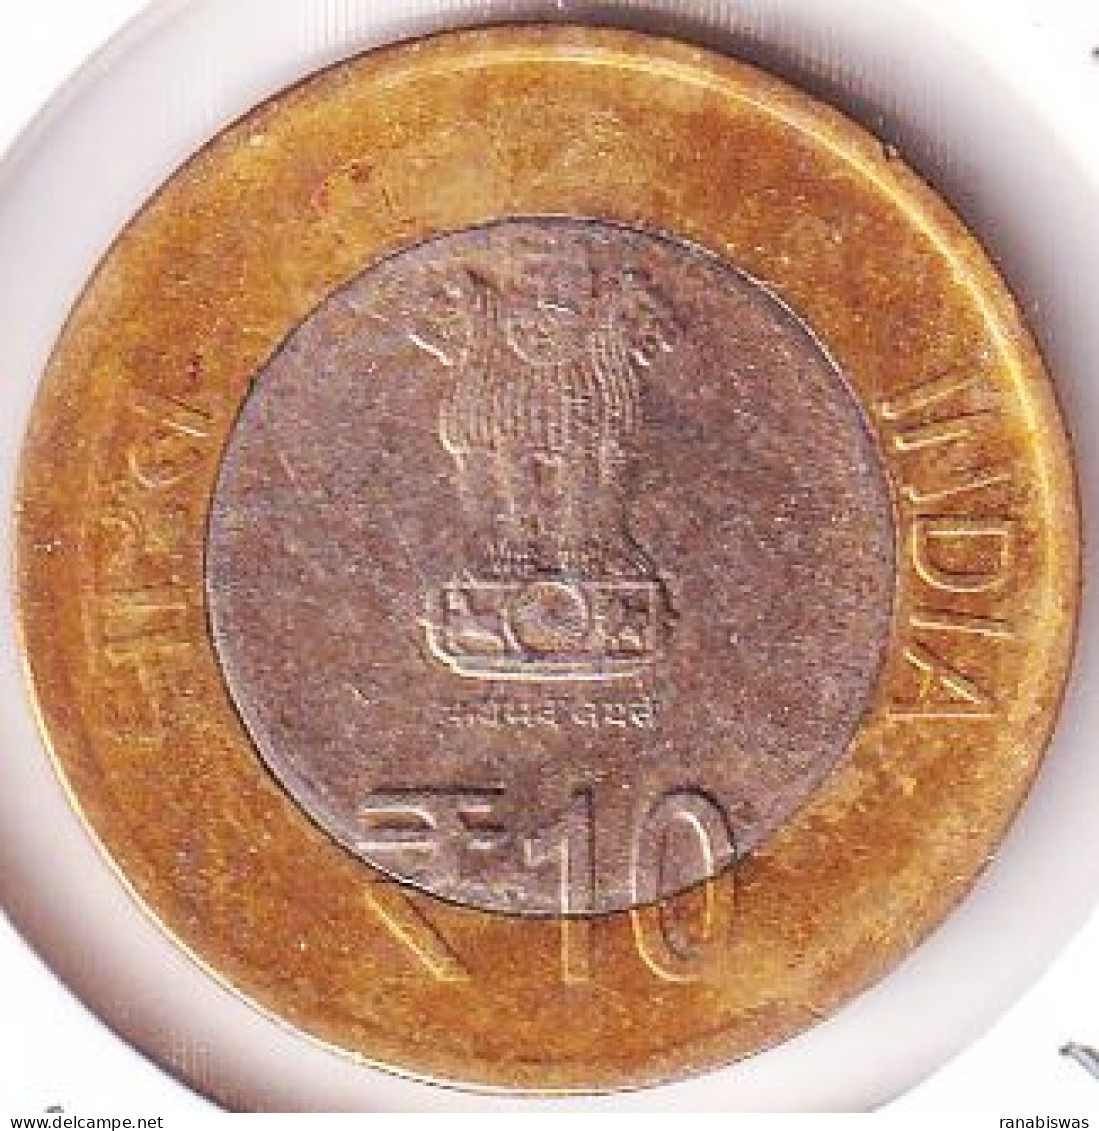 INDIA COIN LOT 450, 10 RUPEES 2016, NATIONAL ARCHIVES, NOIDA MINT, XF, SCARE - India